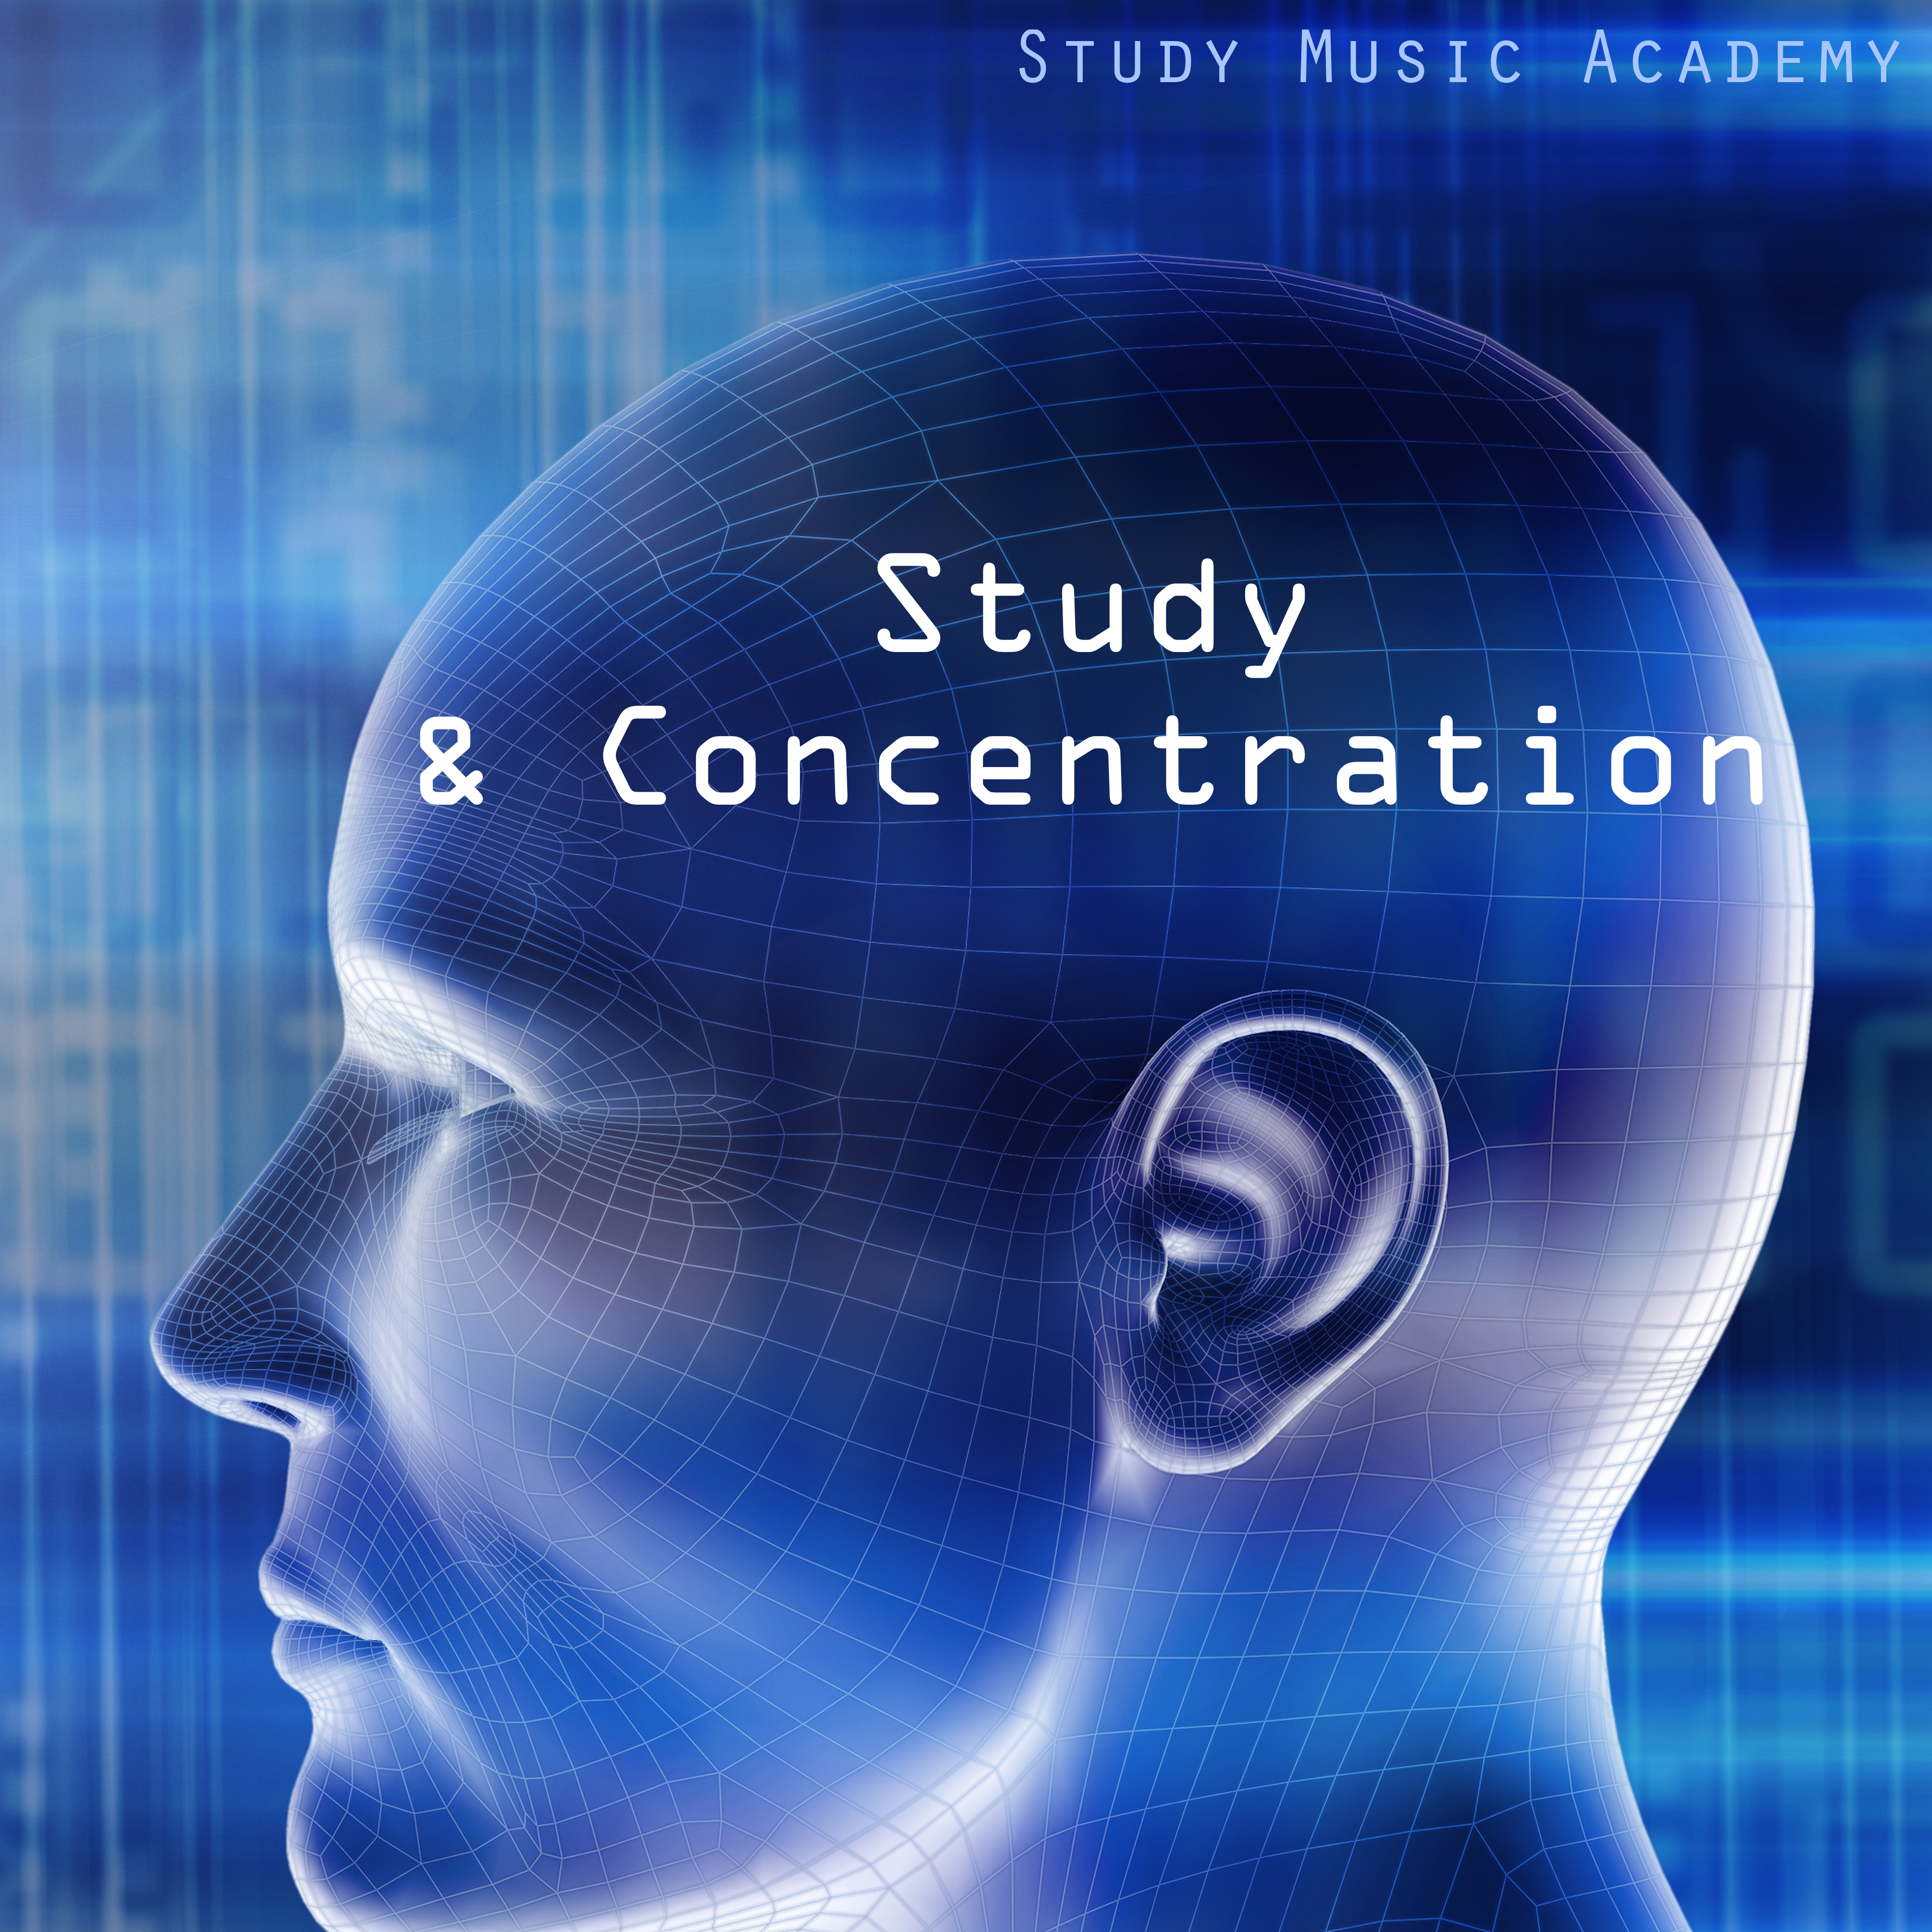 Study & Concentration - Good Study Music and Relaxing Meditation Songs for Mind Power, Focus, Brain Stimulation and Studying